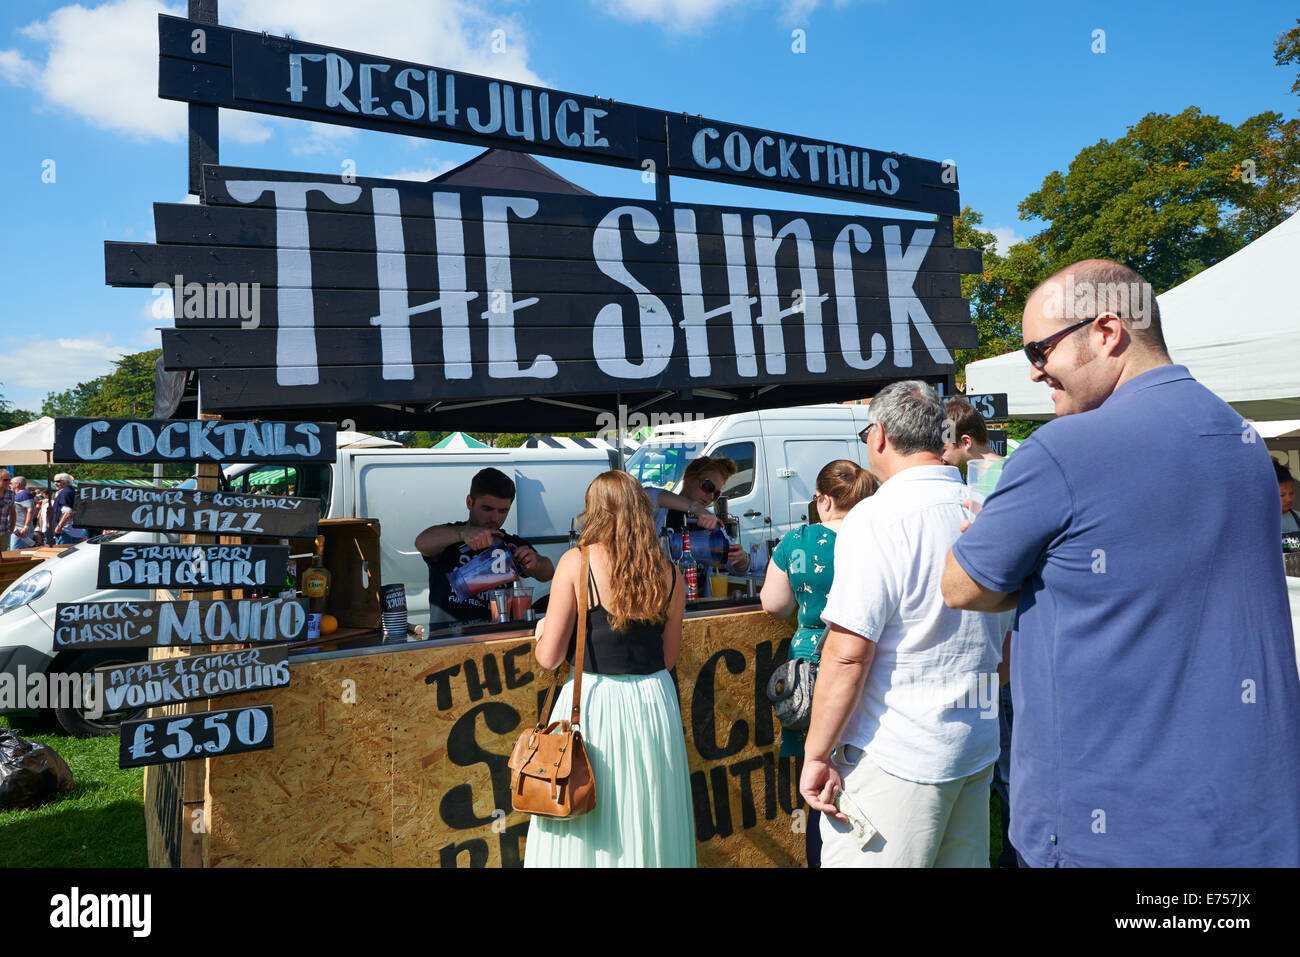 The Shack Selling Cocktails And Fresh Juice At The Food And Drink Festival Leamington Spa Warwickshire UK Stock Photo